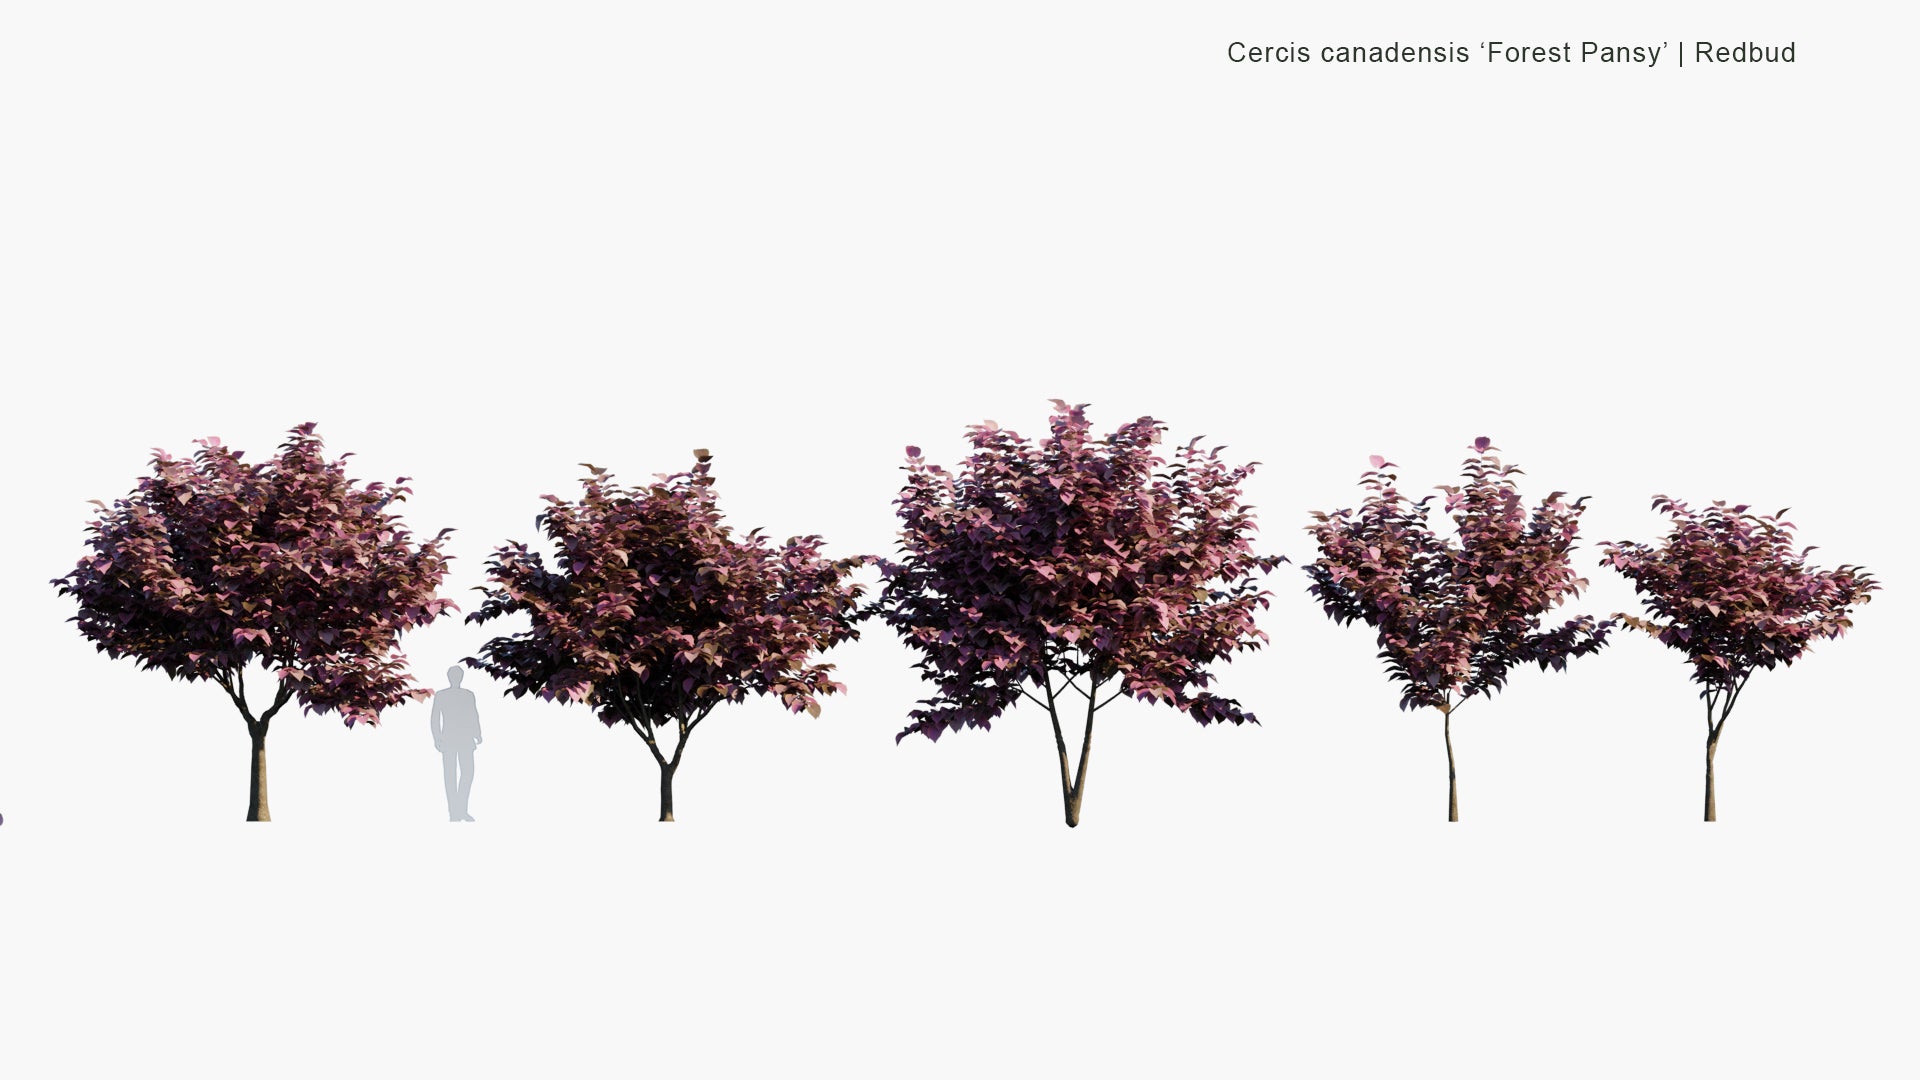 Low Poly Cercis Canadensis - 'Forest Pansy'  (Redbud) (3D Model)